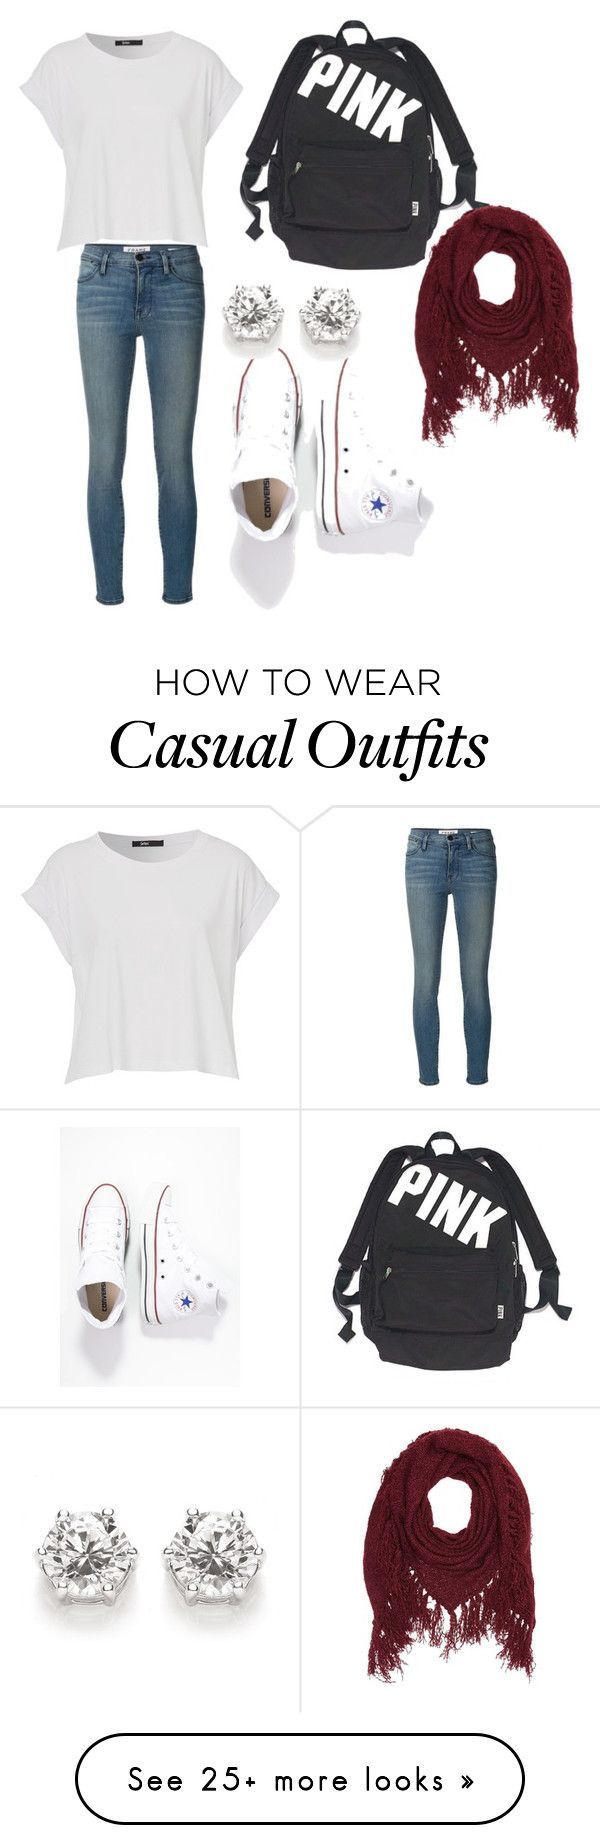 “School or casual outfit” by hankate15 on Polyvore featuring moda, Frame Denim, Converse, Victoria’s Secre